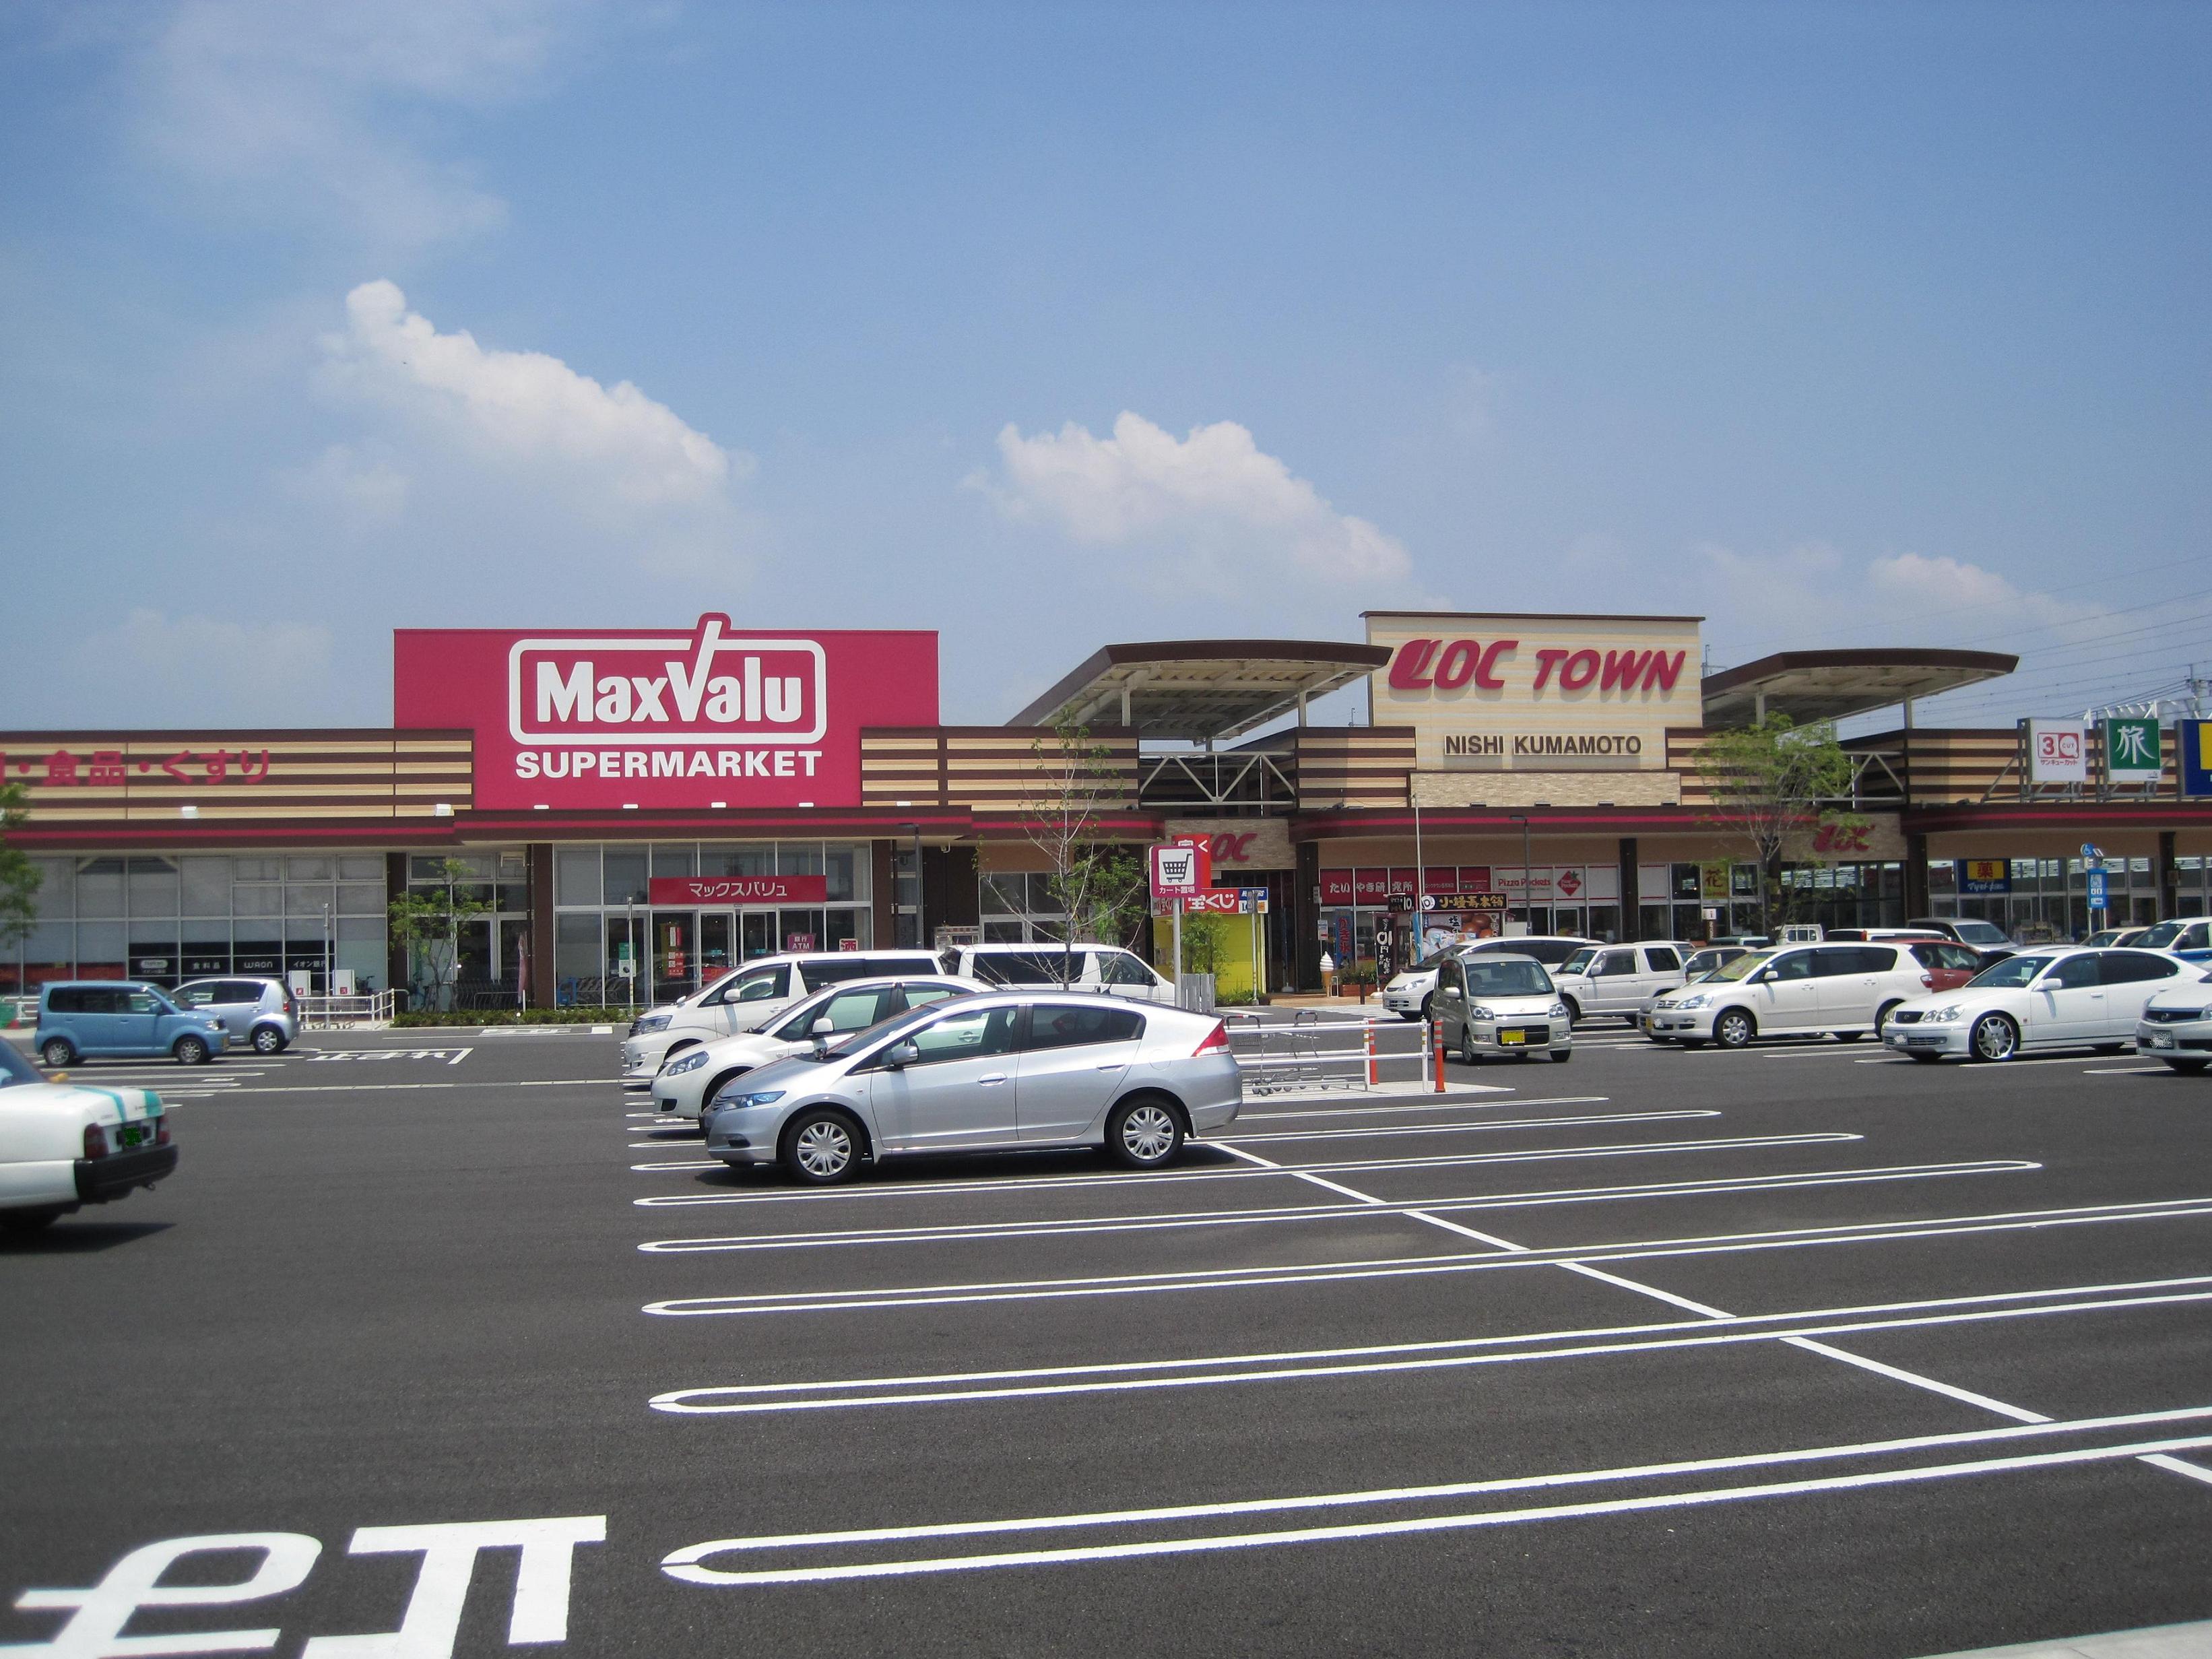 Shopping centre. 1540m until the lock Town Kumamoto west (shopping center)